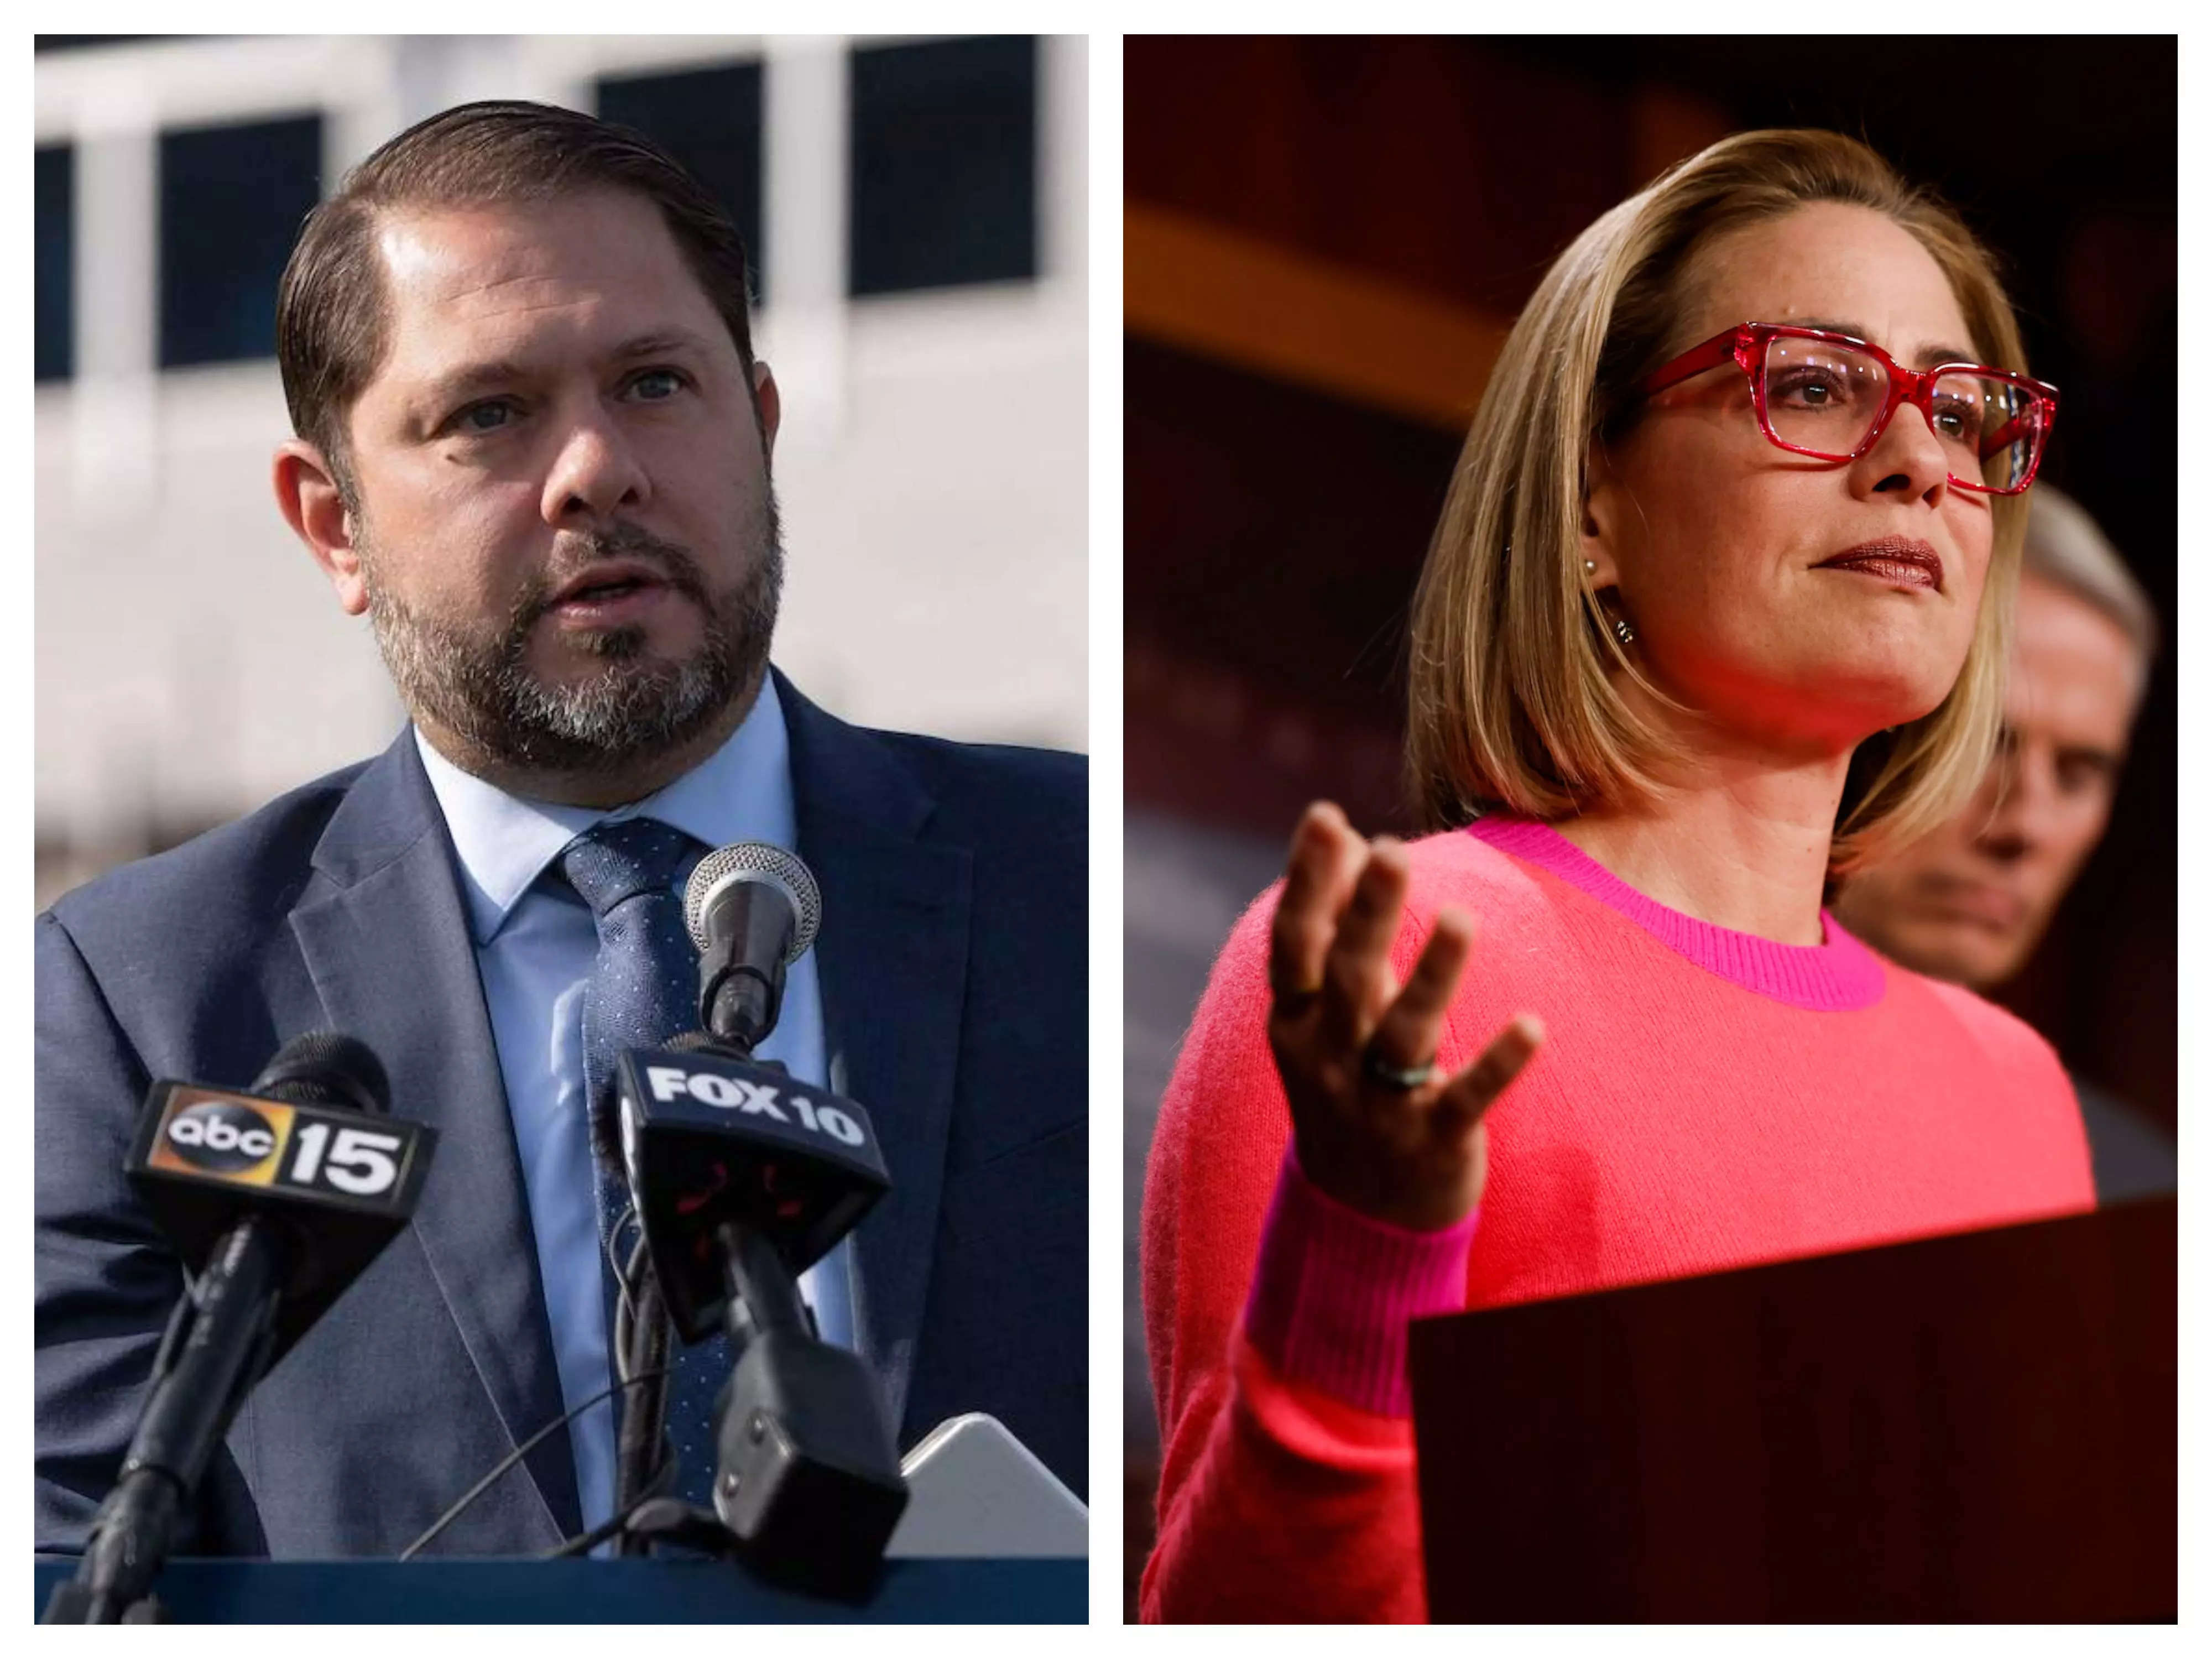 Arizona Democratic Rep. Ruben Gallego recently outraised Independent